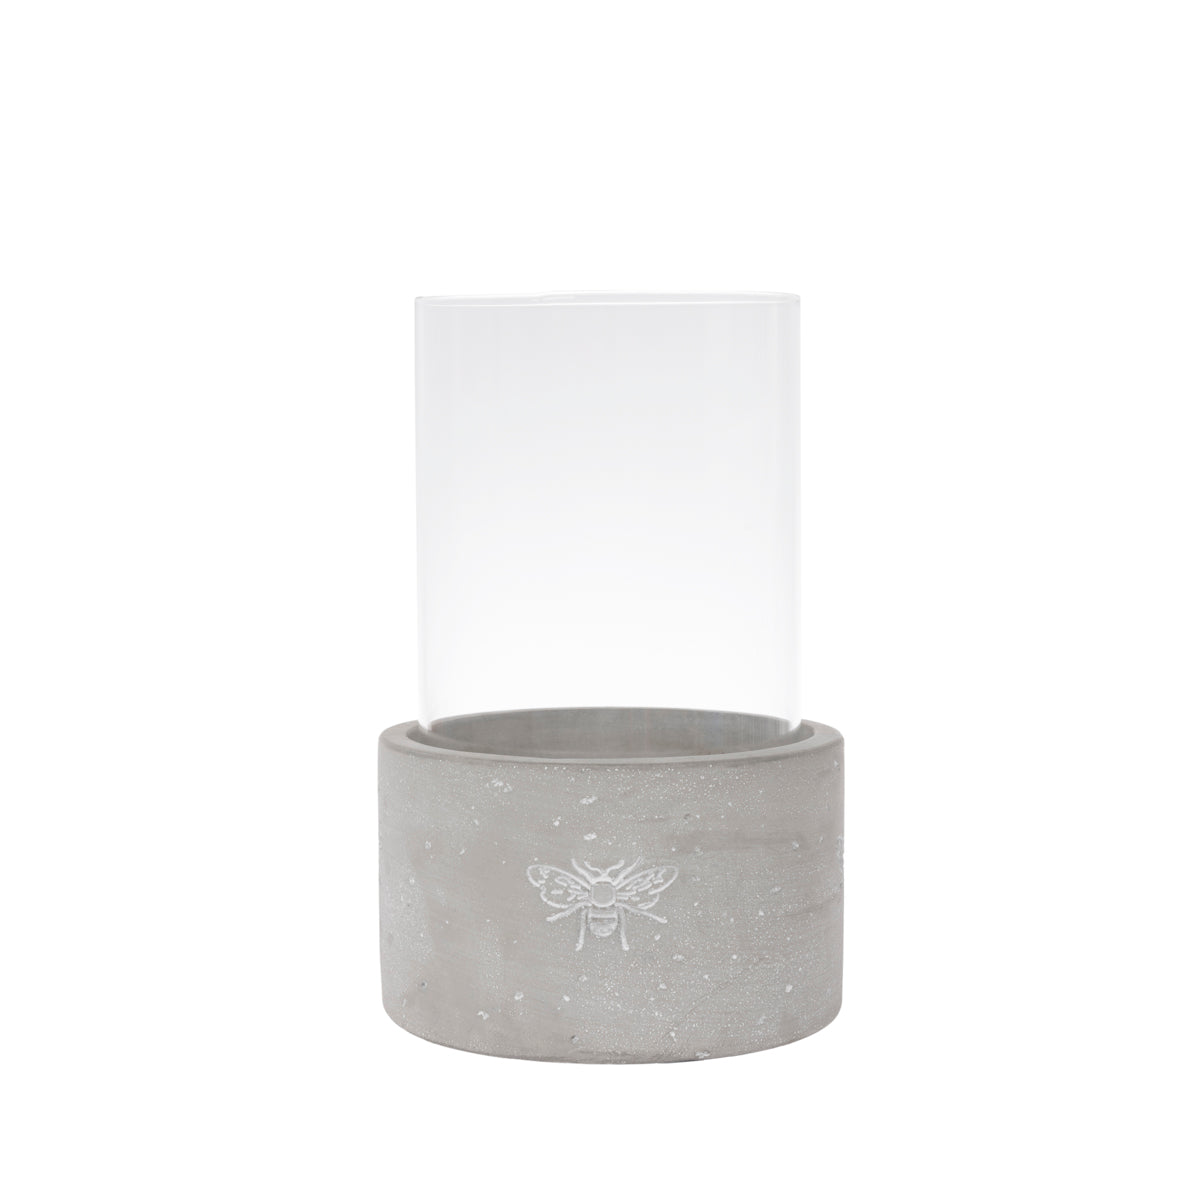 Bees Candle Holder by Sophie Allport